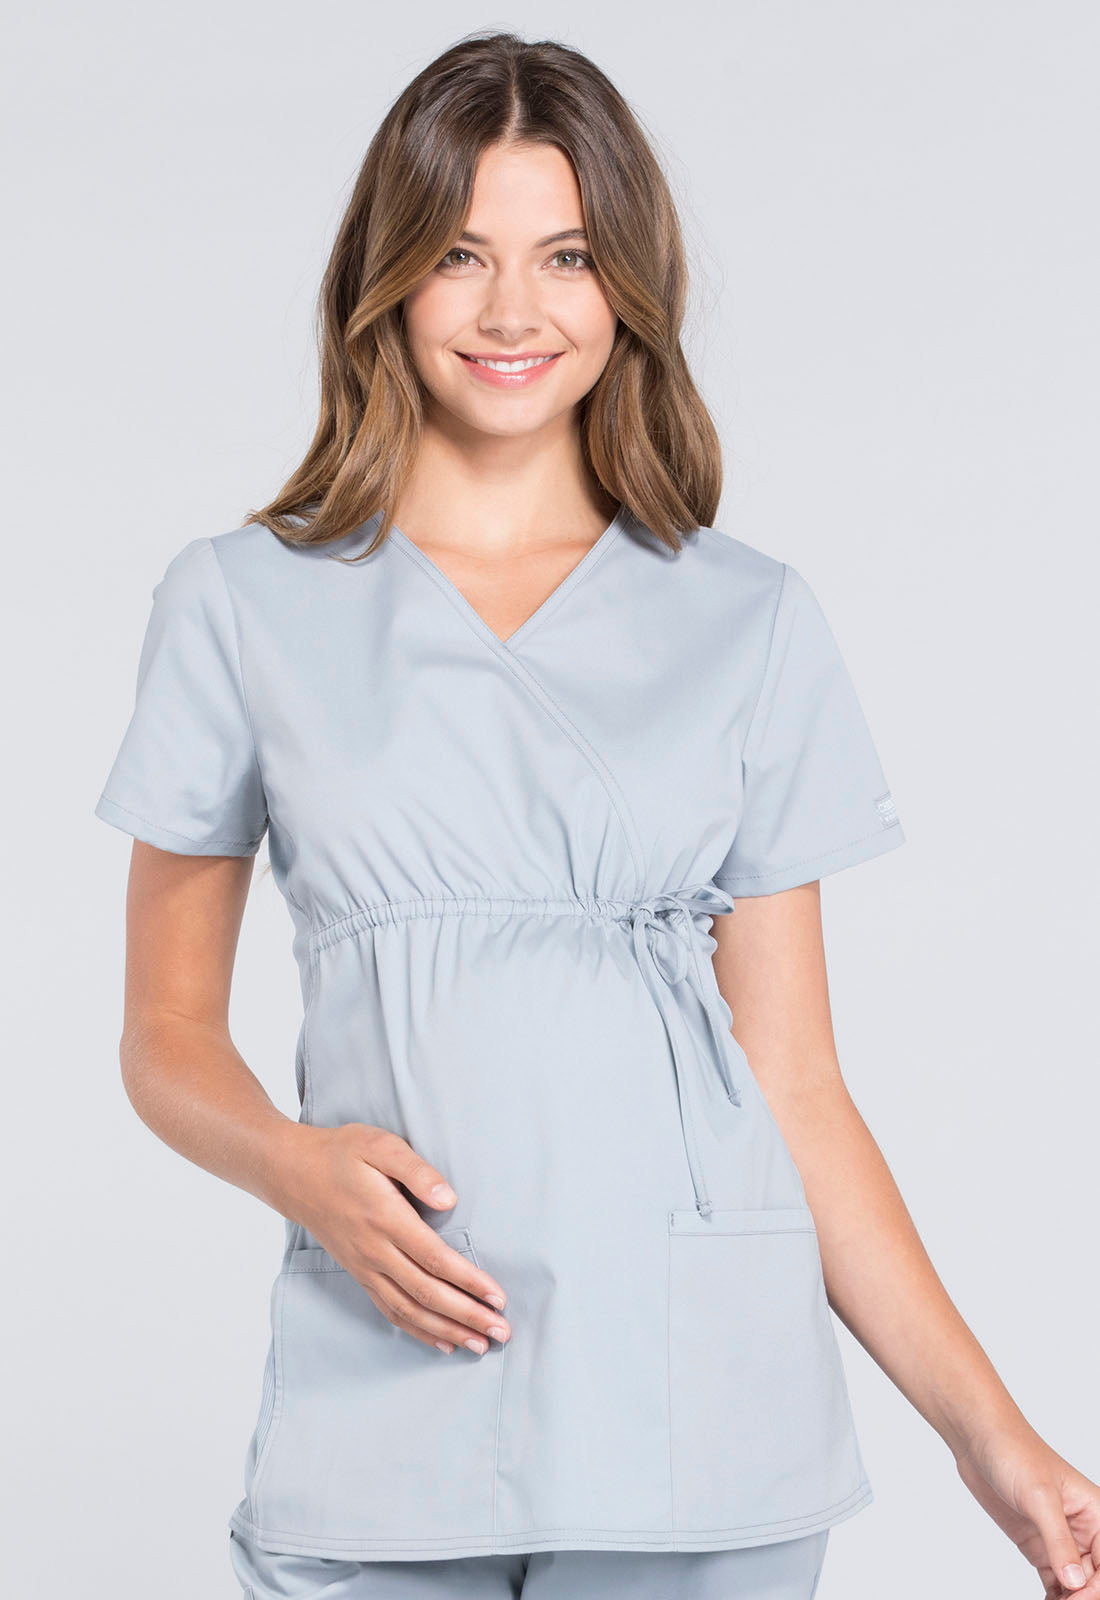 White Cherokee Workwear Professionals Maternity Mock Wrap Top (11 Colors)